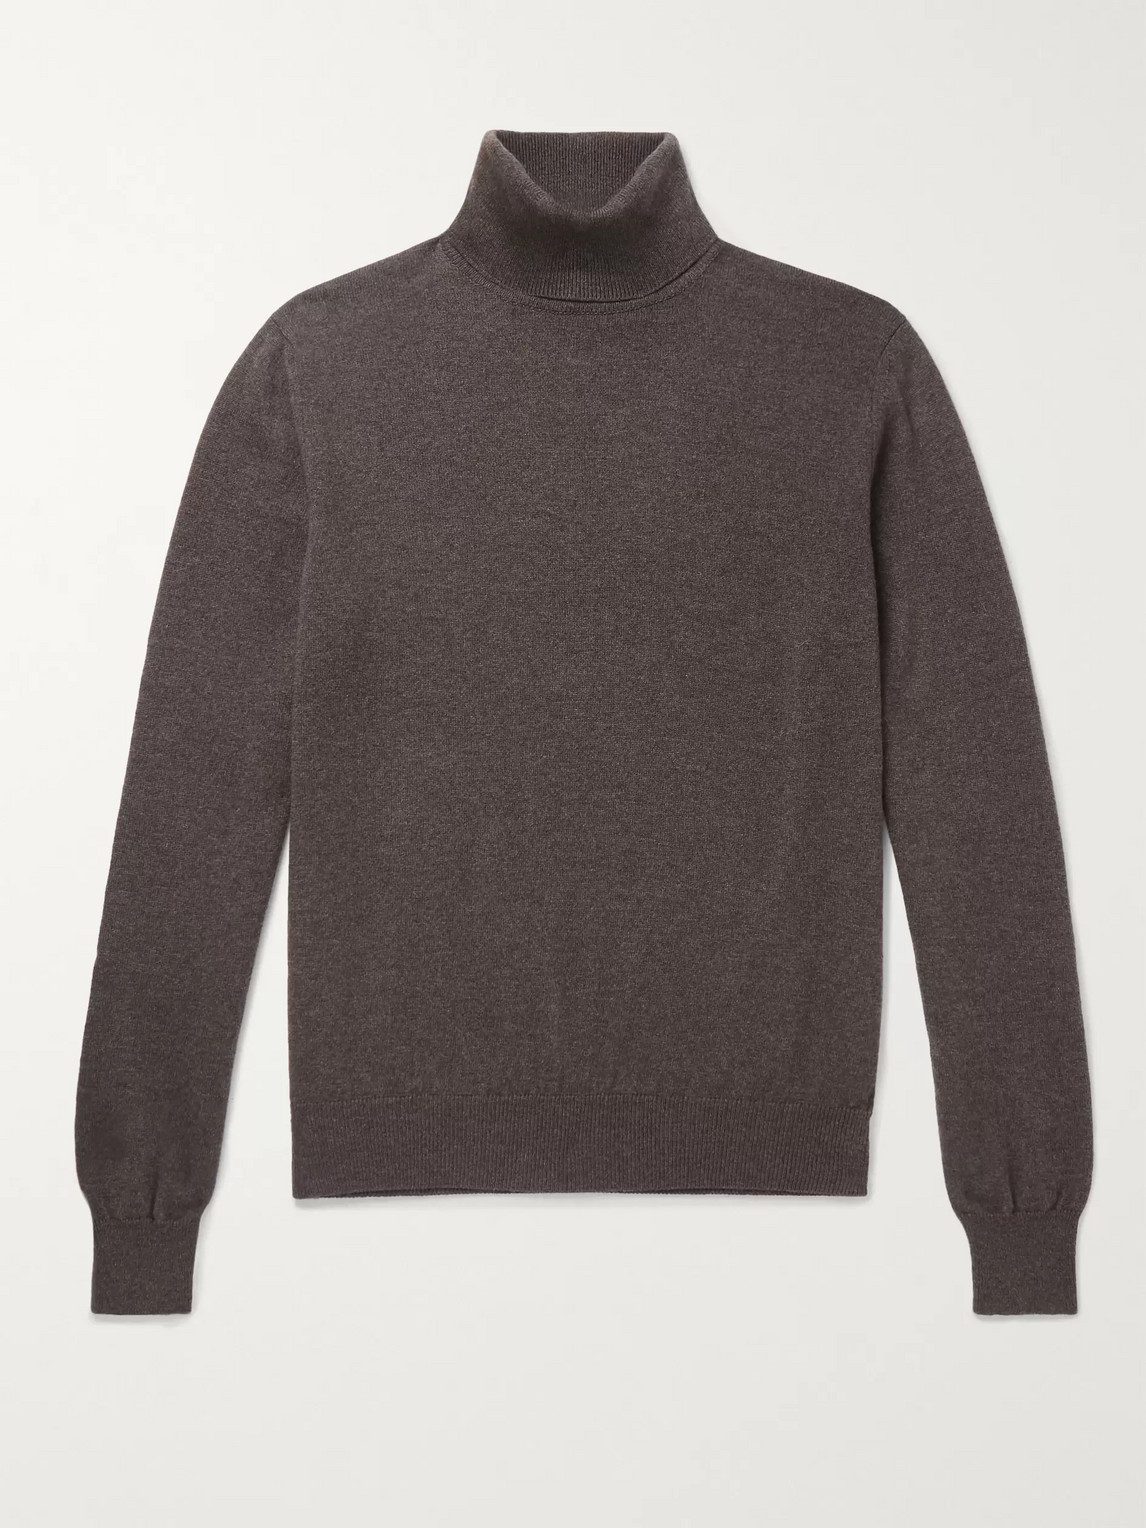 Anderson & Sheppard Camoshita Cashmere Rollneck Sweater In Brown